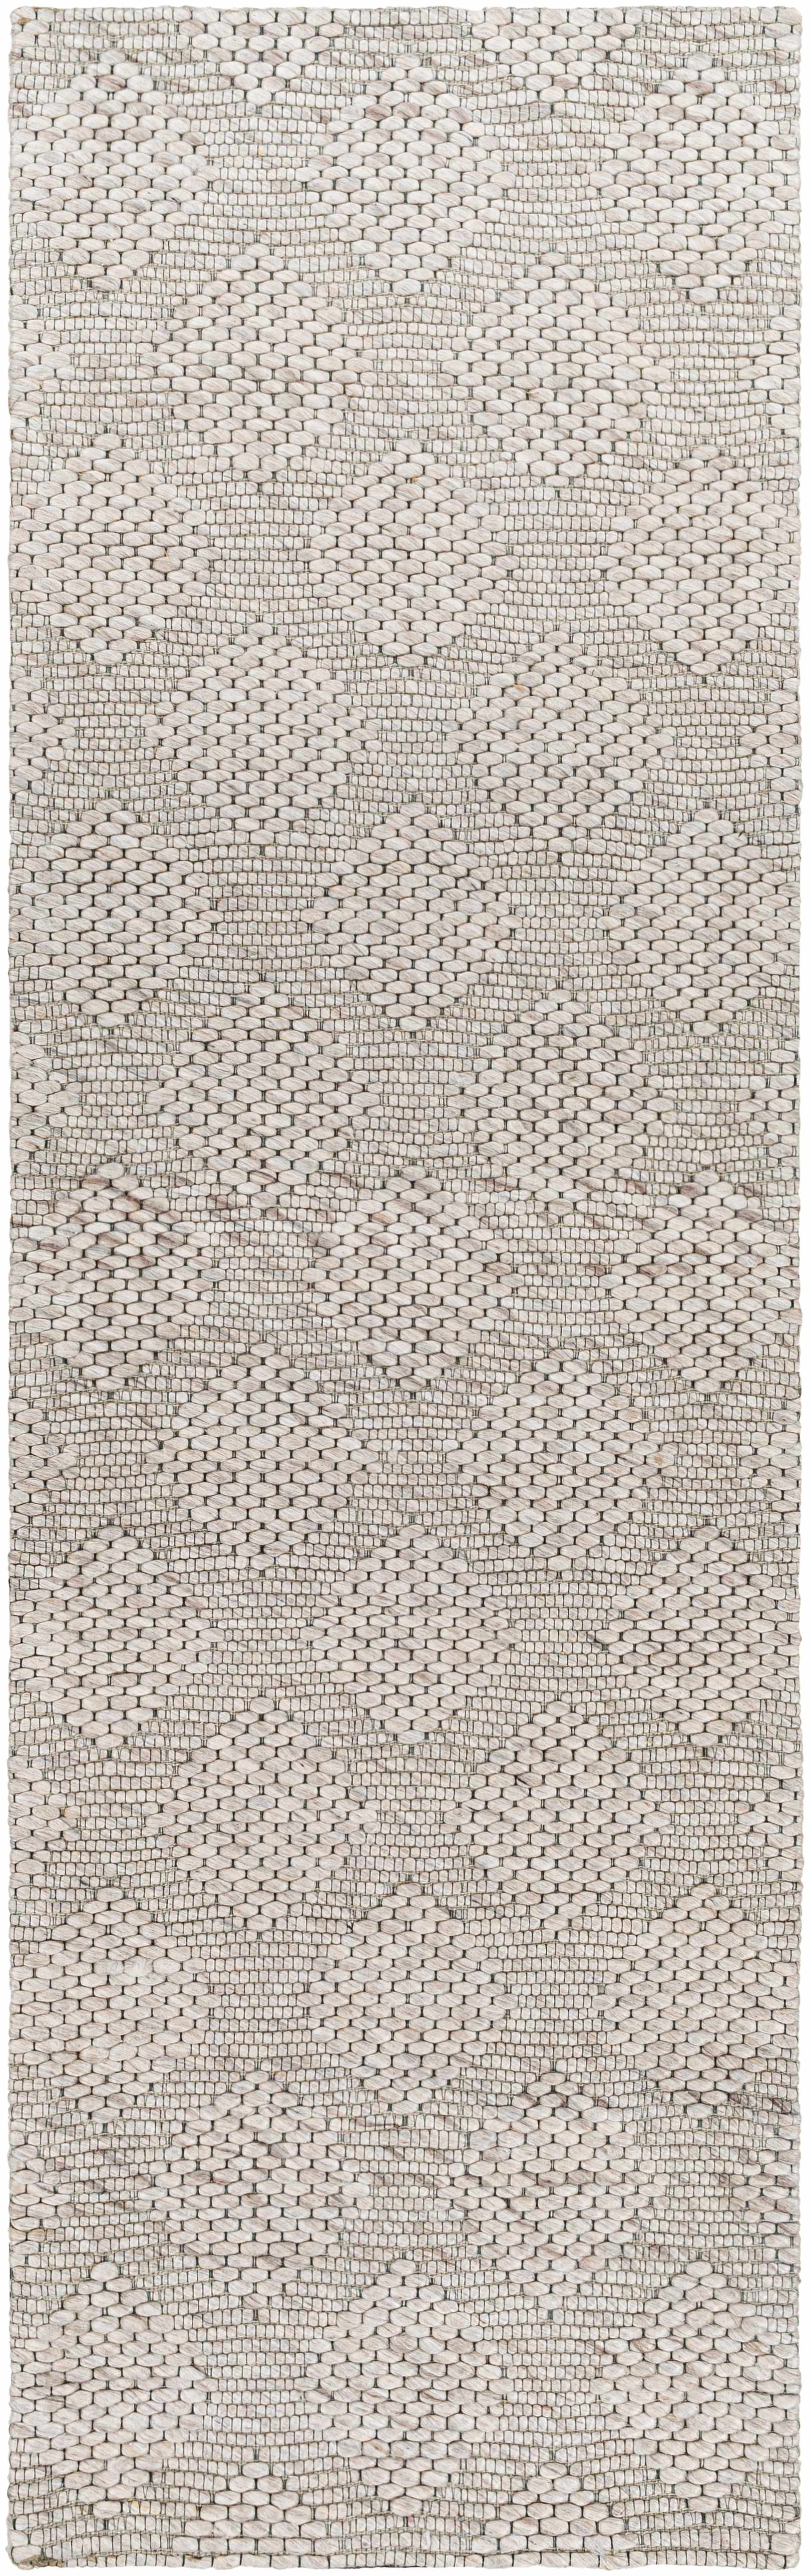 Boutique Rugs Rugs Sauget Area Rug